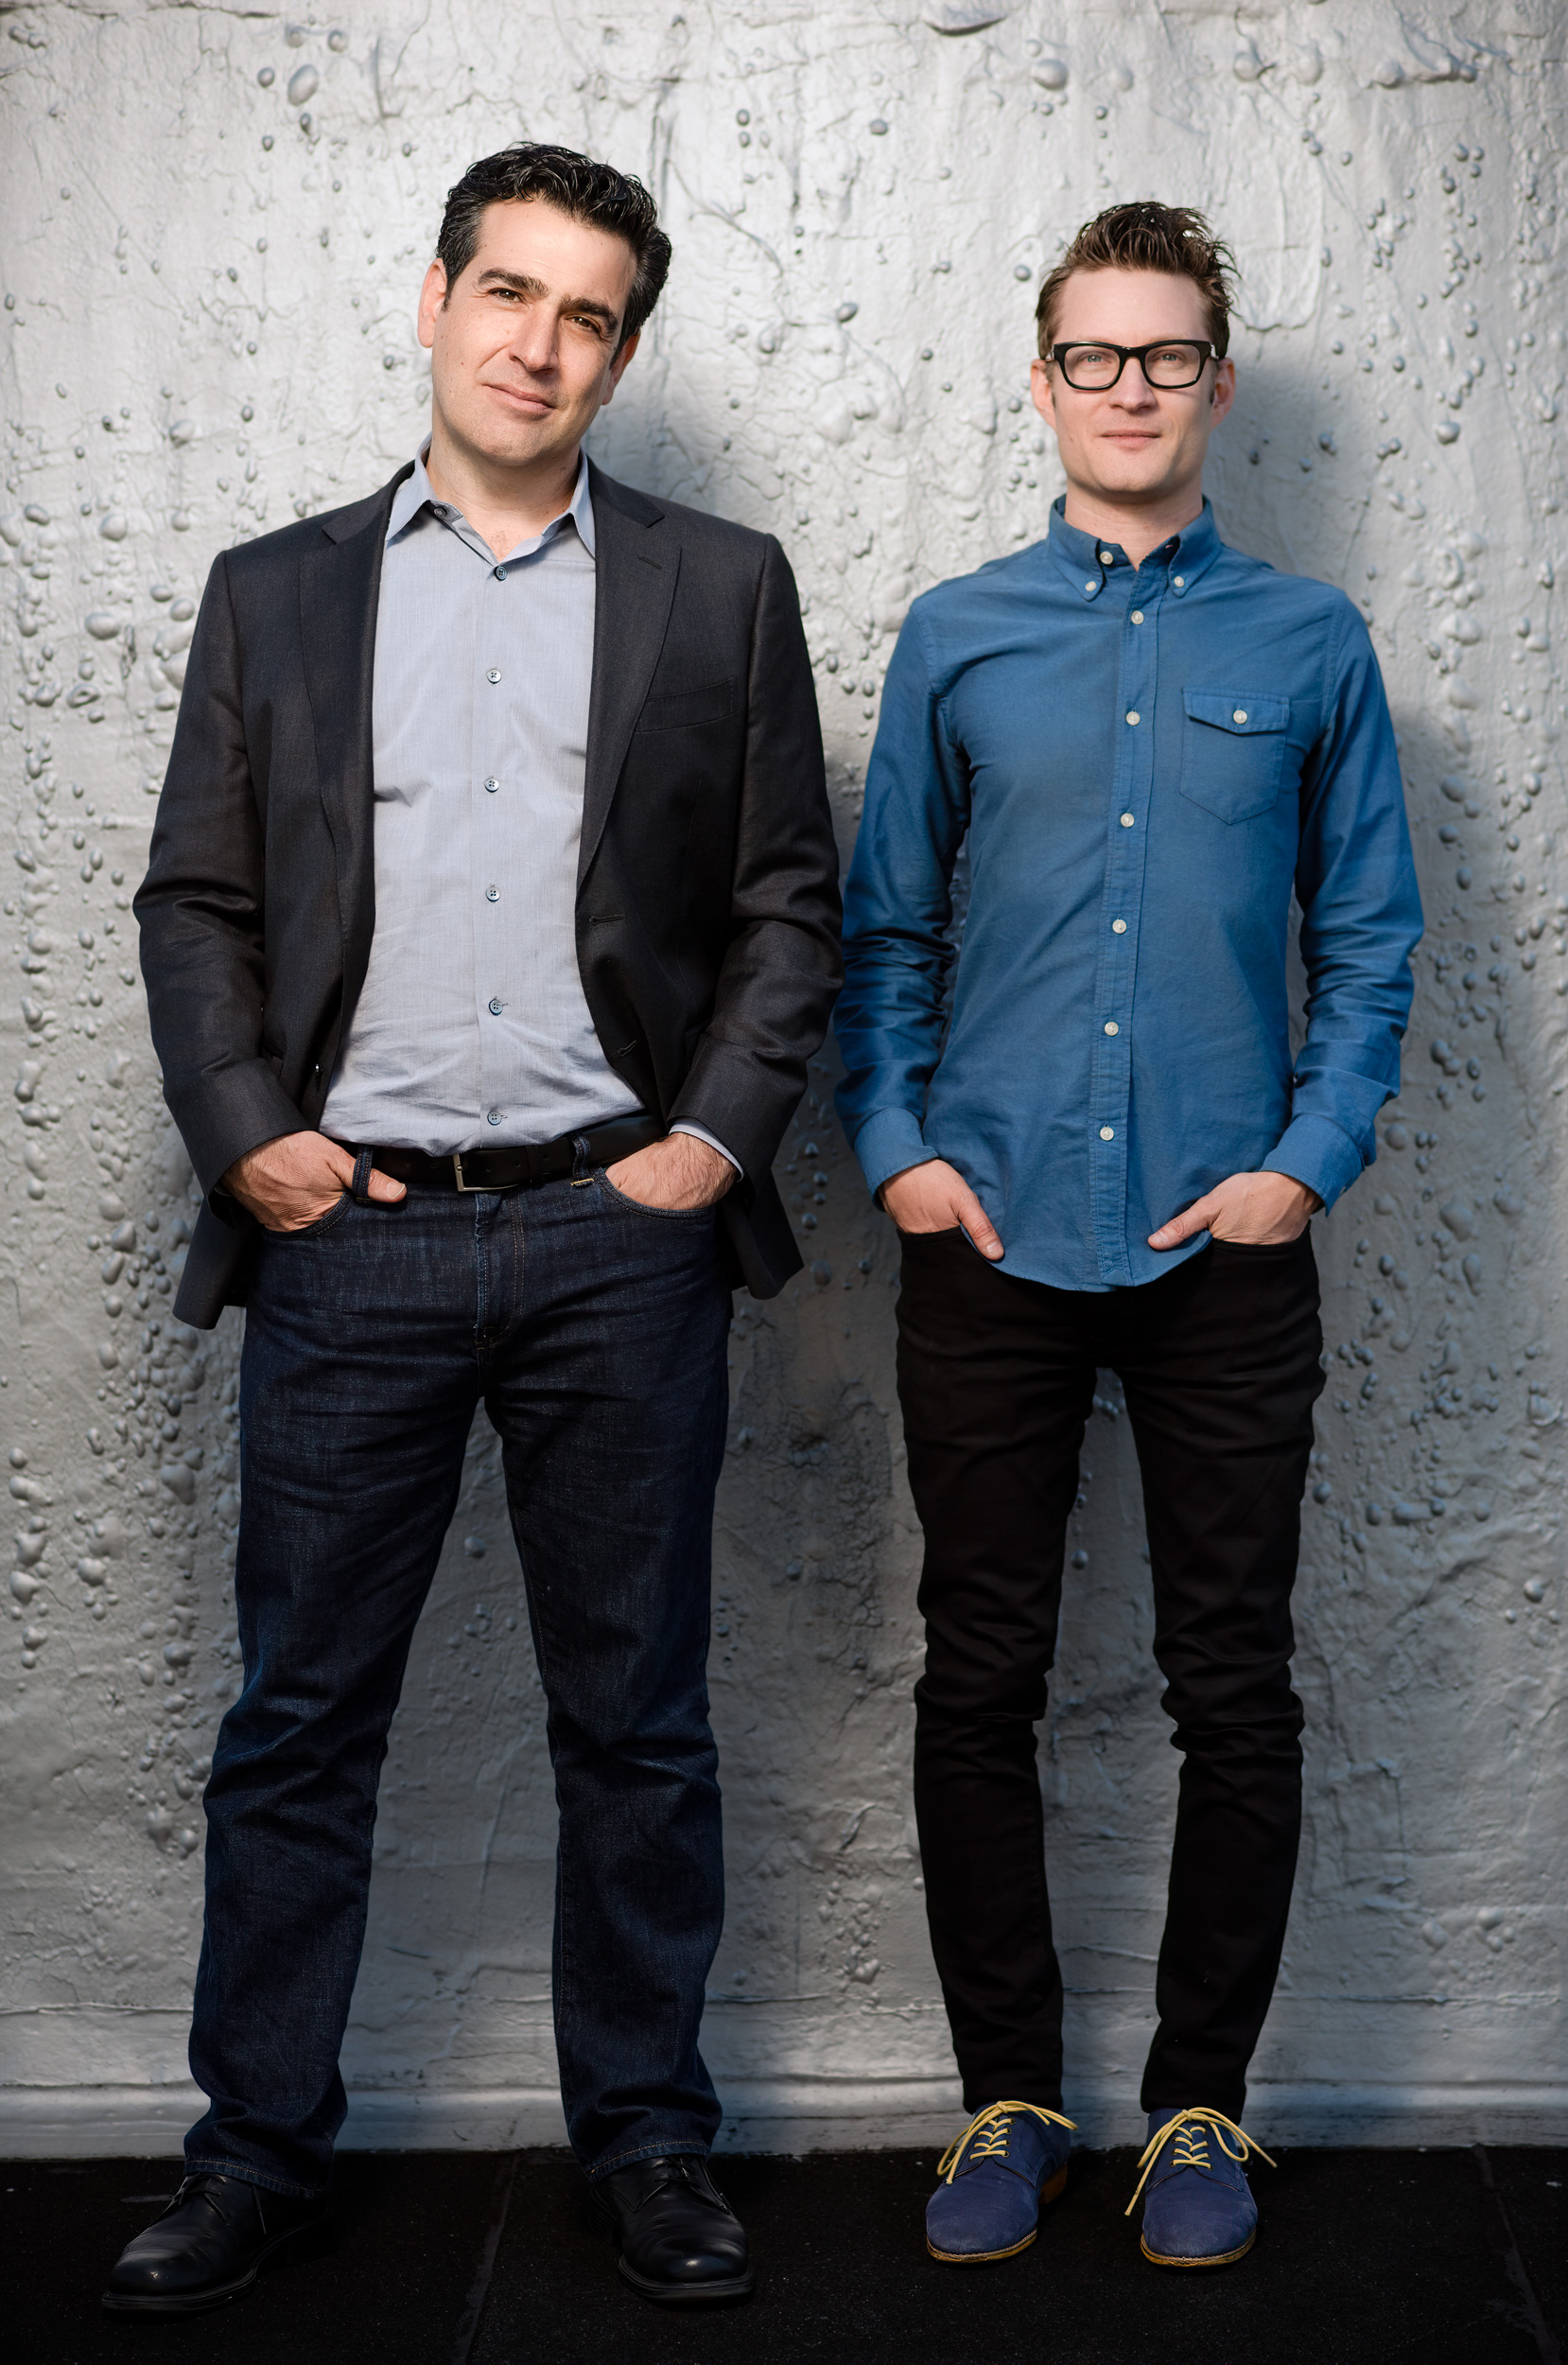 CO founders, Zvika Netter  & Tal Chalozin of Innovid needed some corporate portraits for their website. 